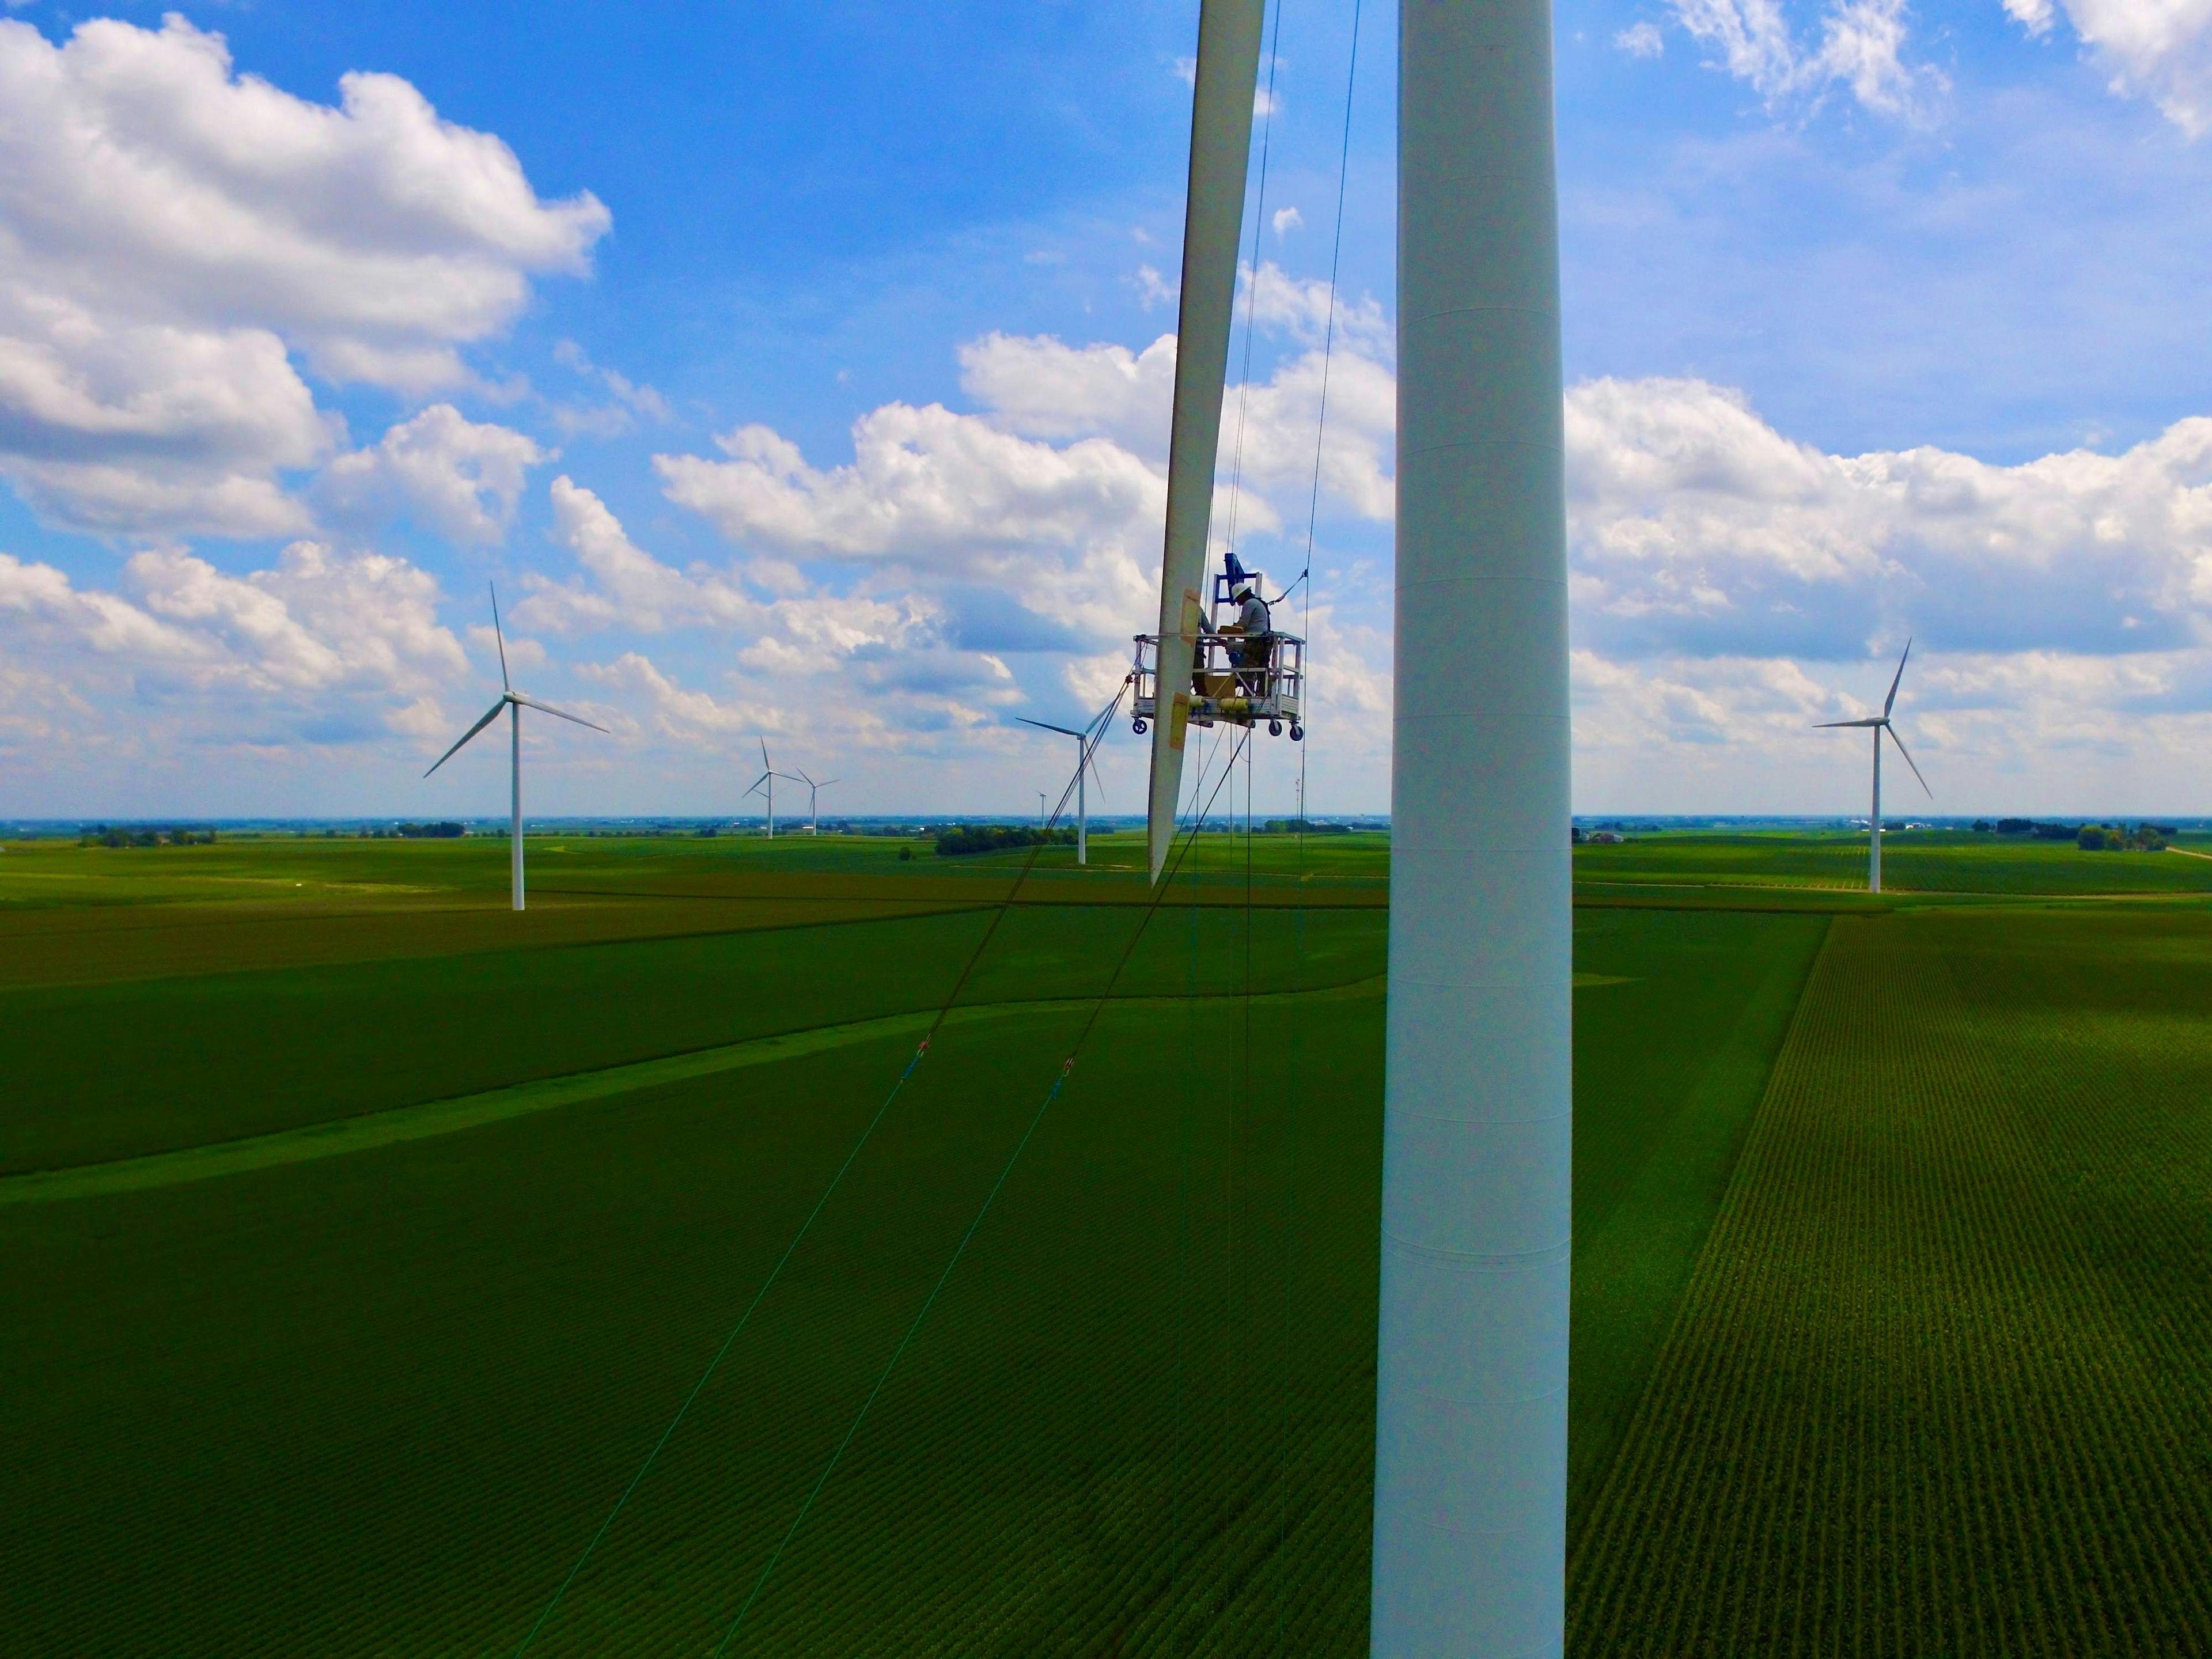 Blade repair technicians are crucial in the wind energy industry